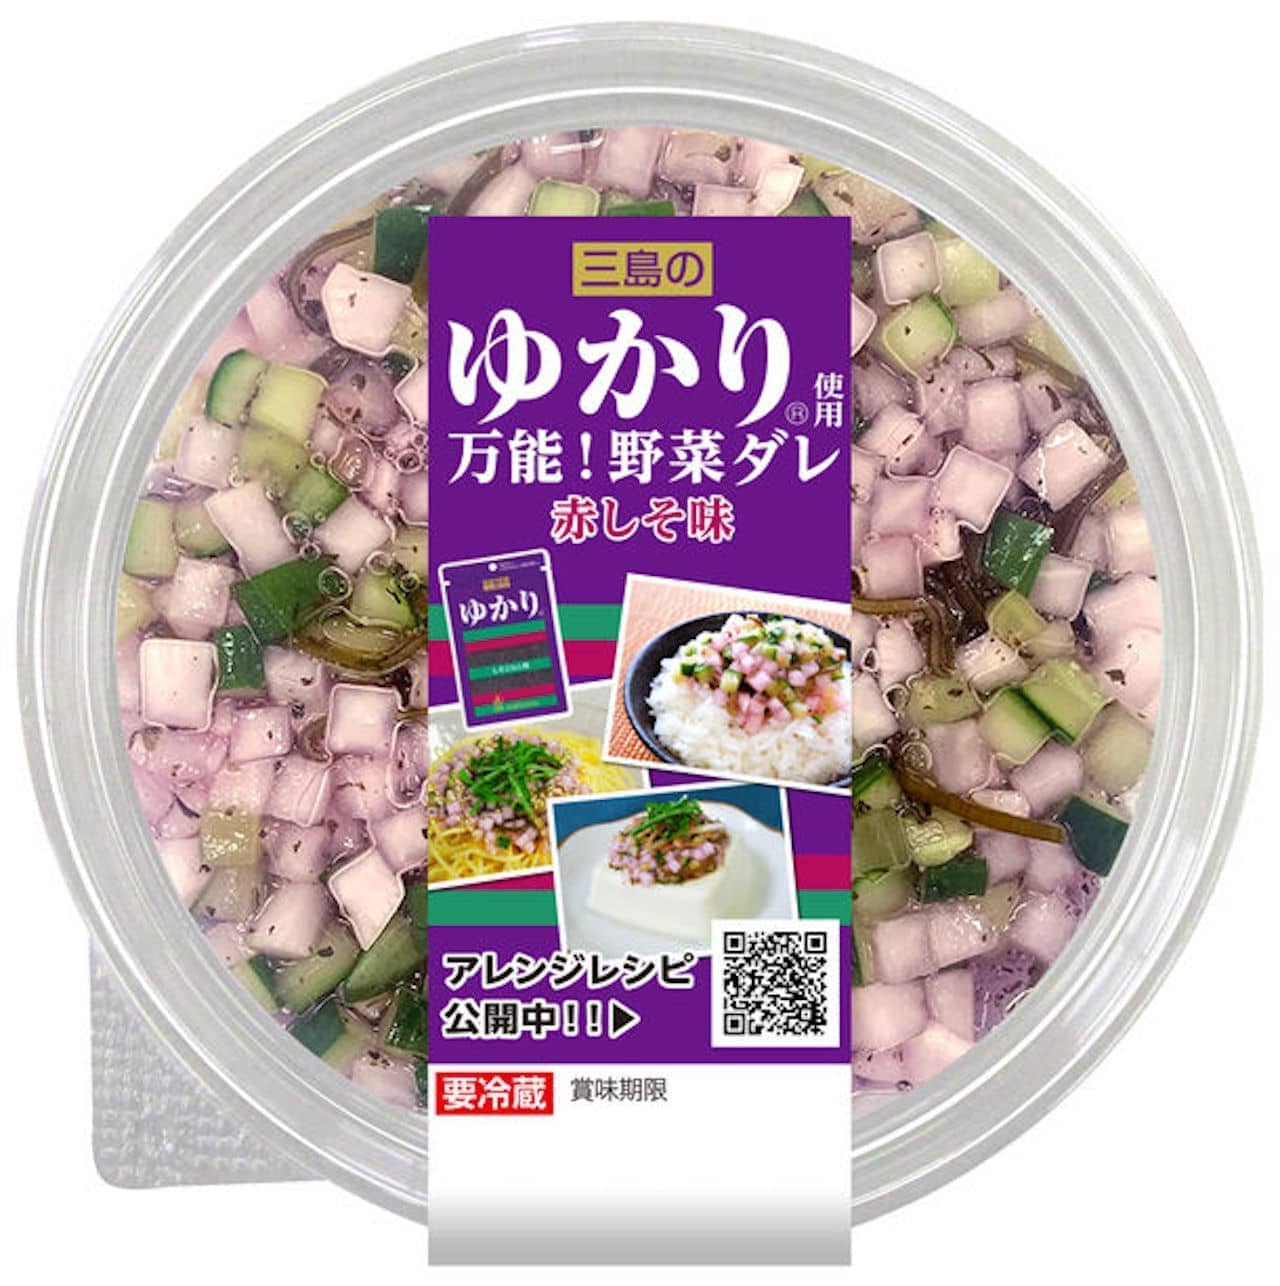 Mishima's Yukari is used in "All-purpose! Vegetable Sauce with Red Shiso Flavor" from Pickles Corporation